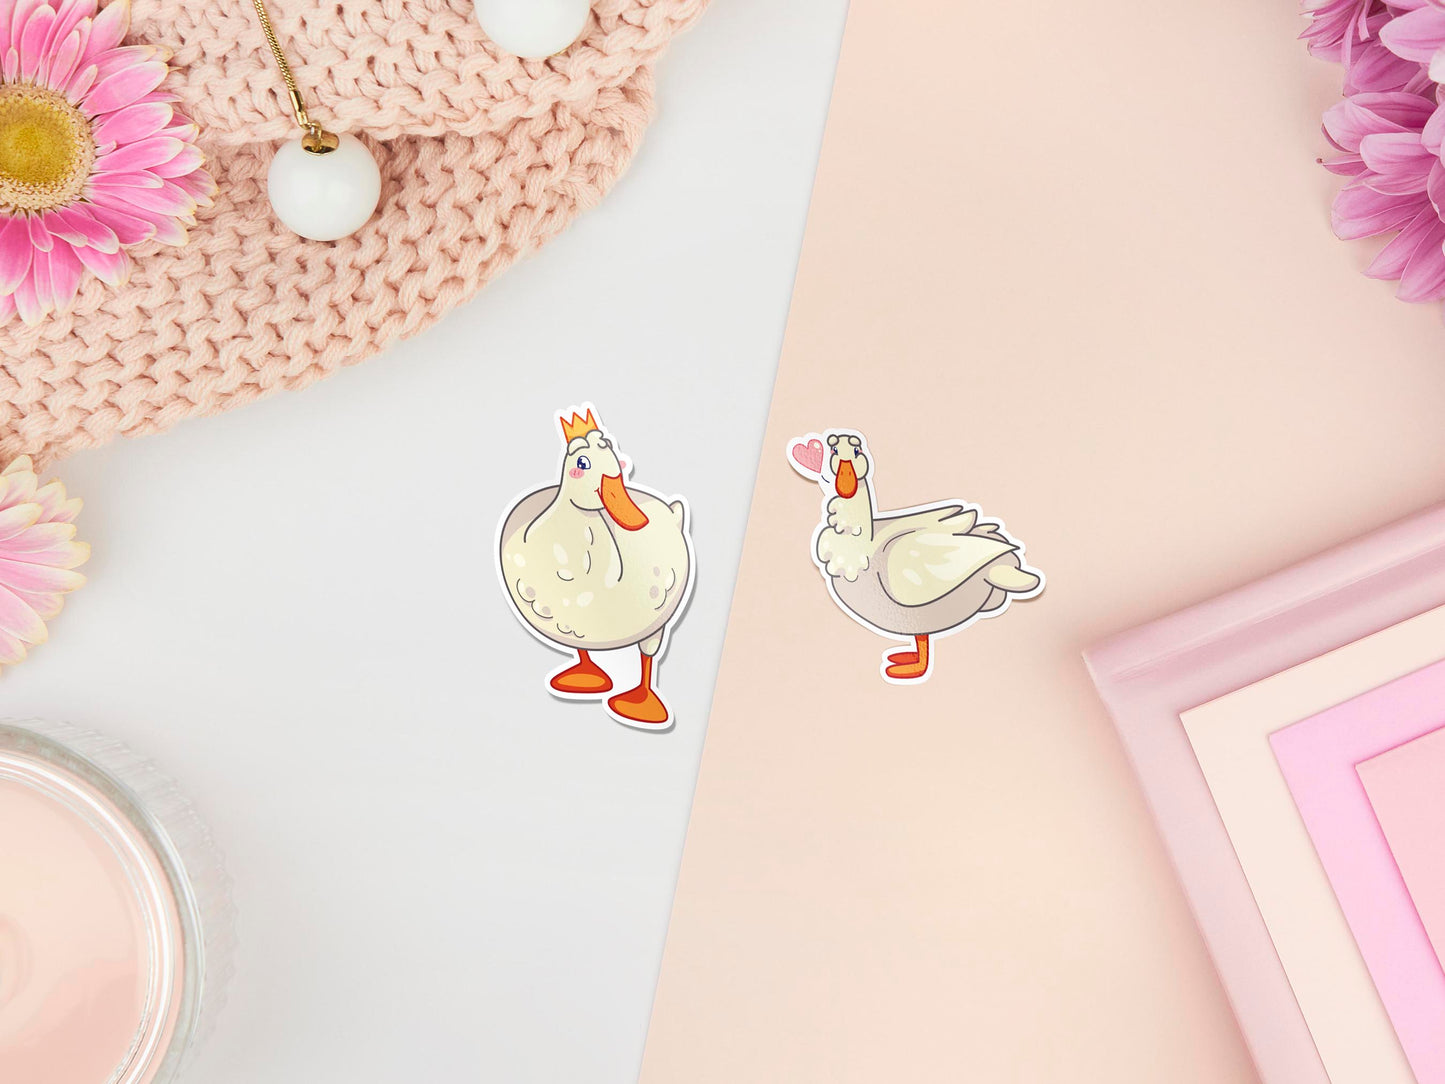 Two stickers of digitally illustrated cartoon of white ducks, one is wearing a crown the other has a pink heart